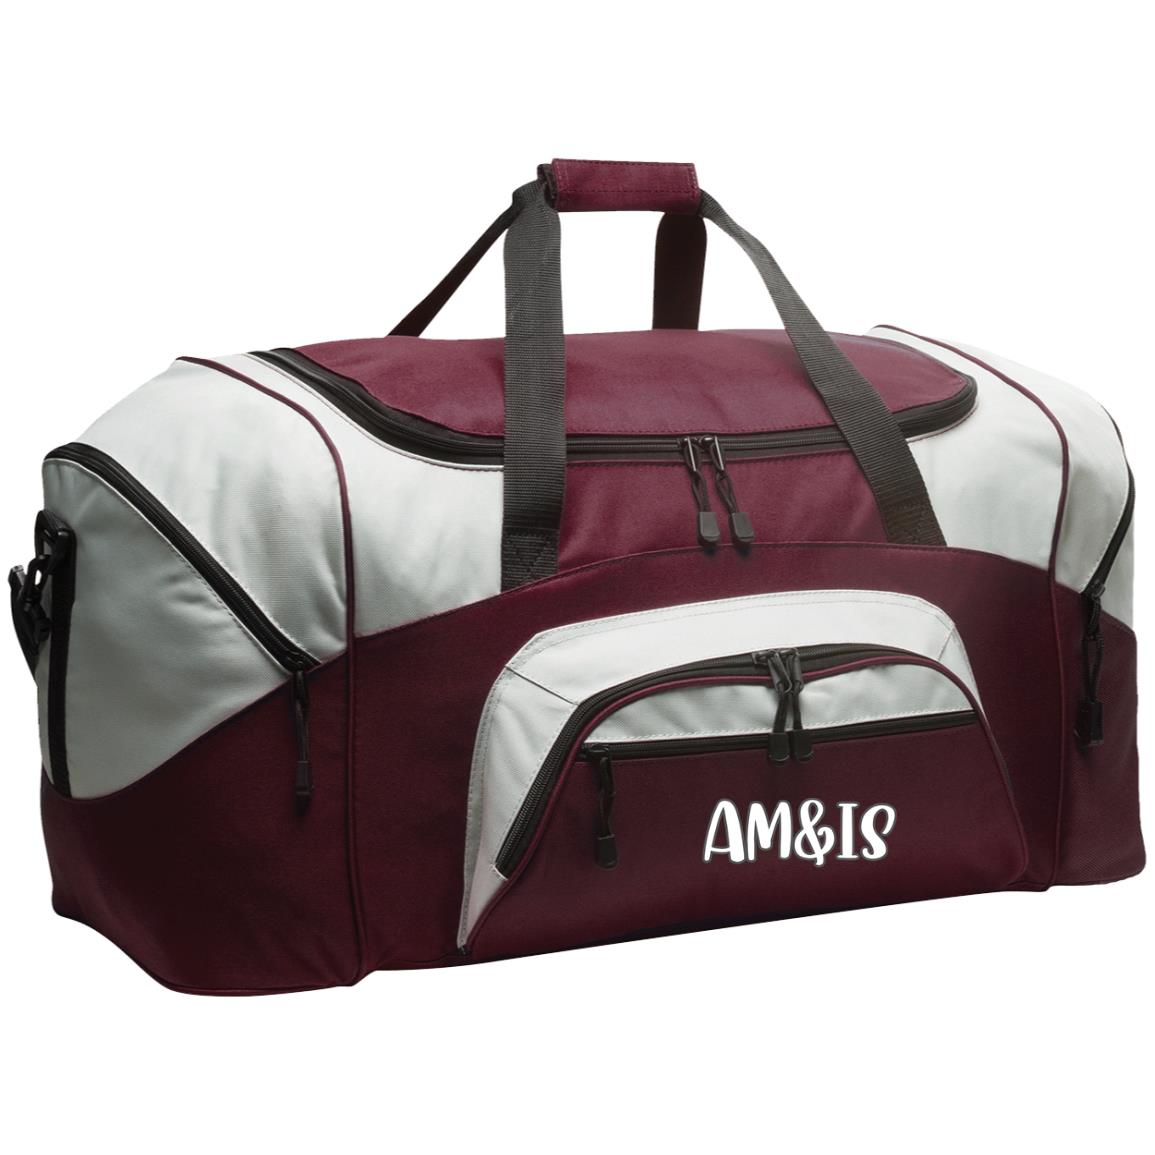 MAROON/GRAY ONE SIZE - AM&IS Activewear Colorblock Sport Duffel - duffel bag at TFC&H Co.